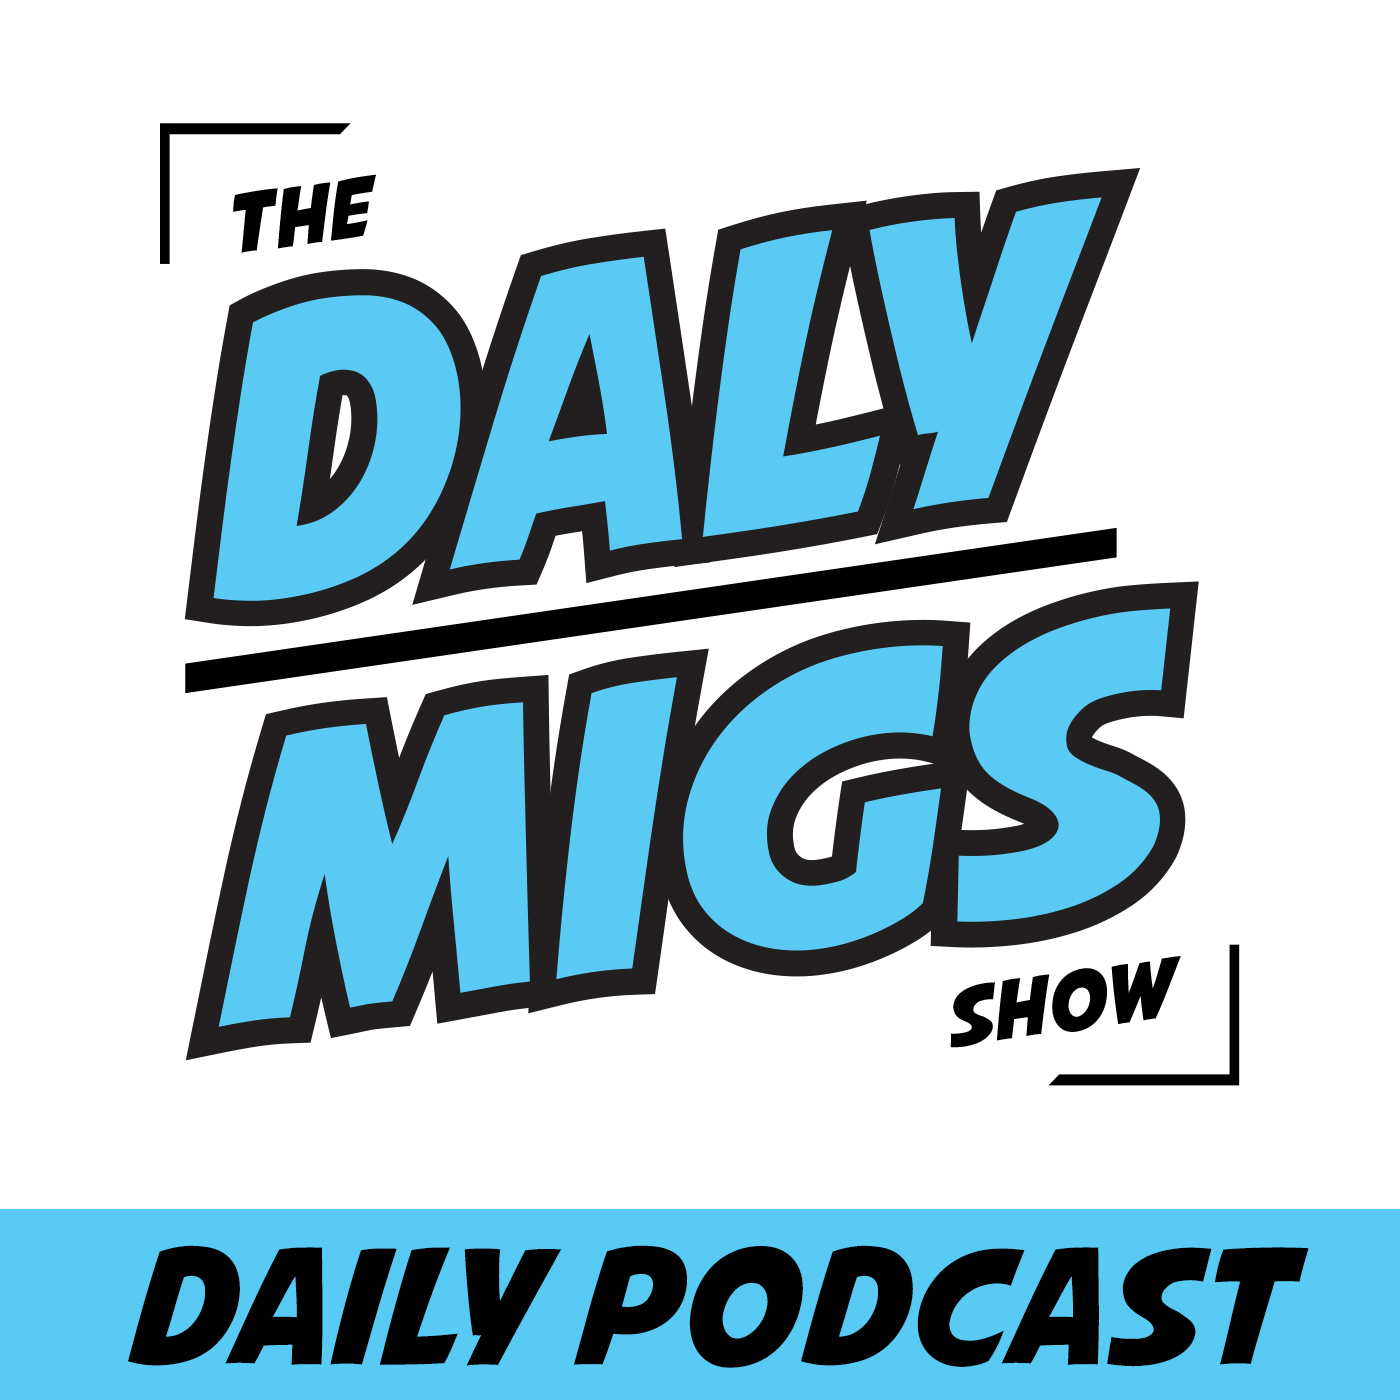 Daily Podcast pt. 1 - "McKenna Geer Paralympian joins us!"